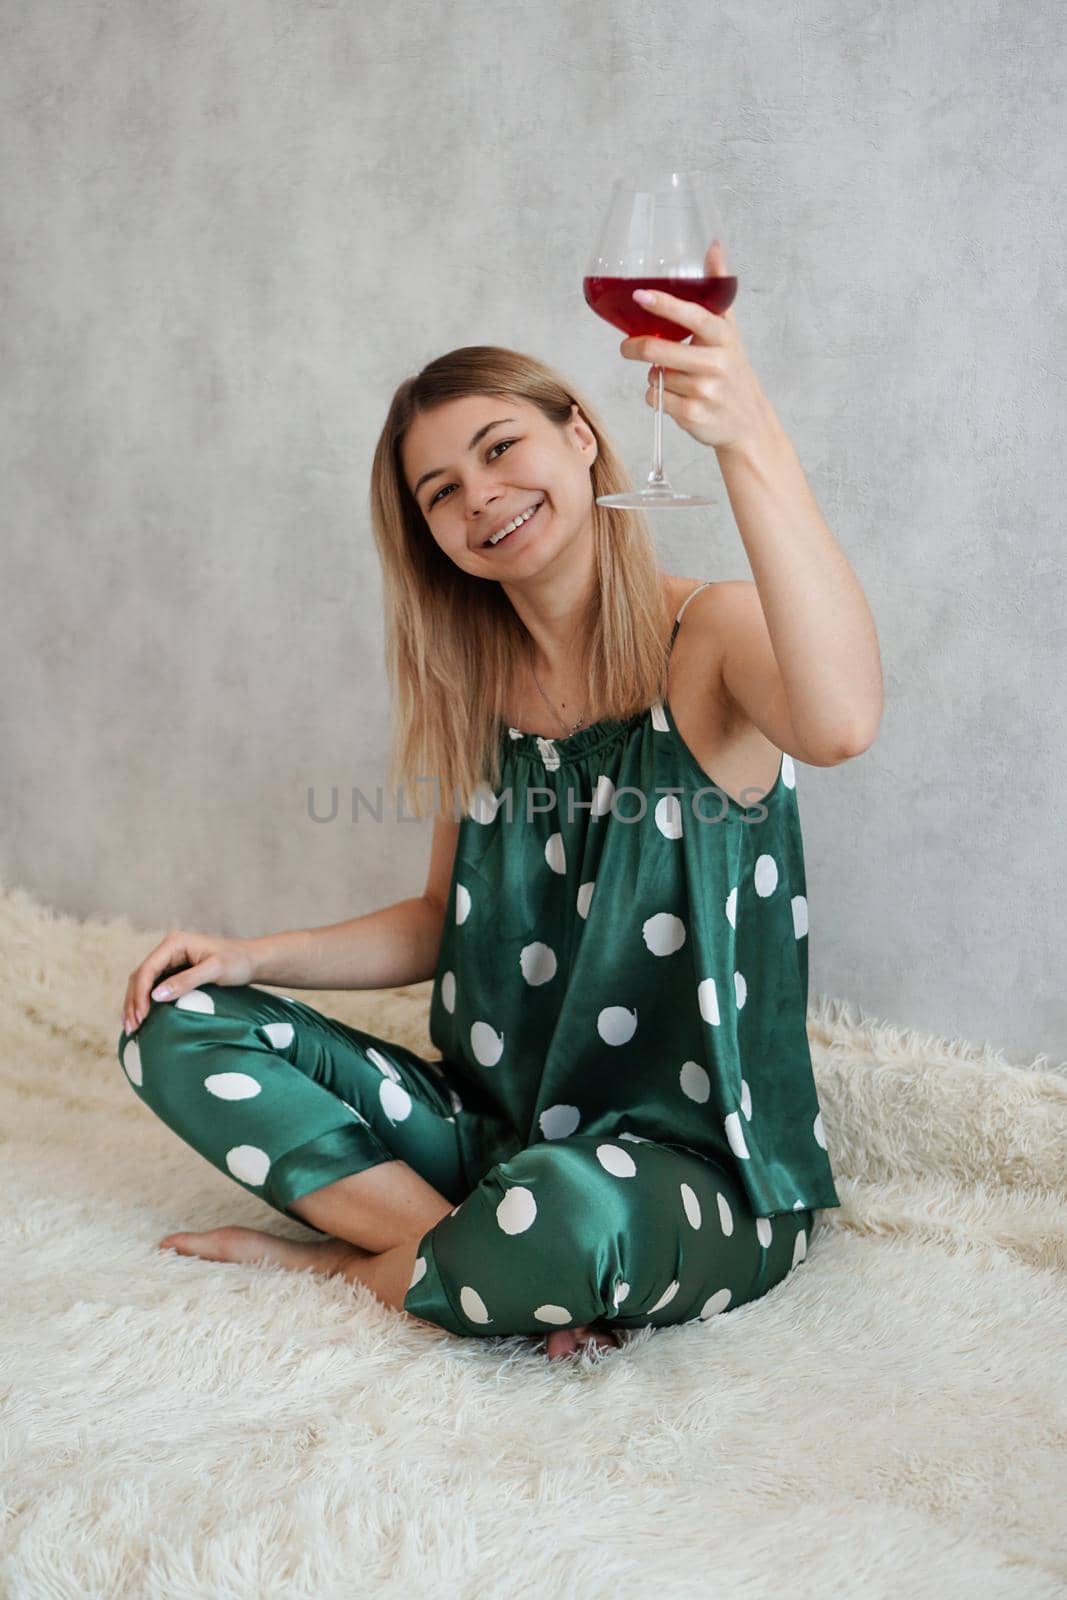 Girl in green pajamas in bed with a glass of red wine. Morning wine in bed. Vertical photo